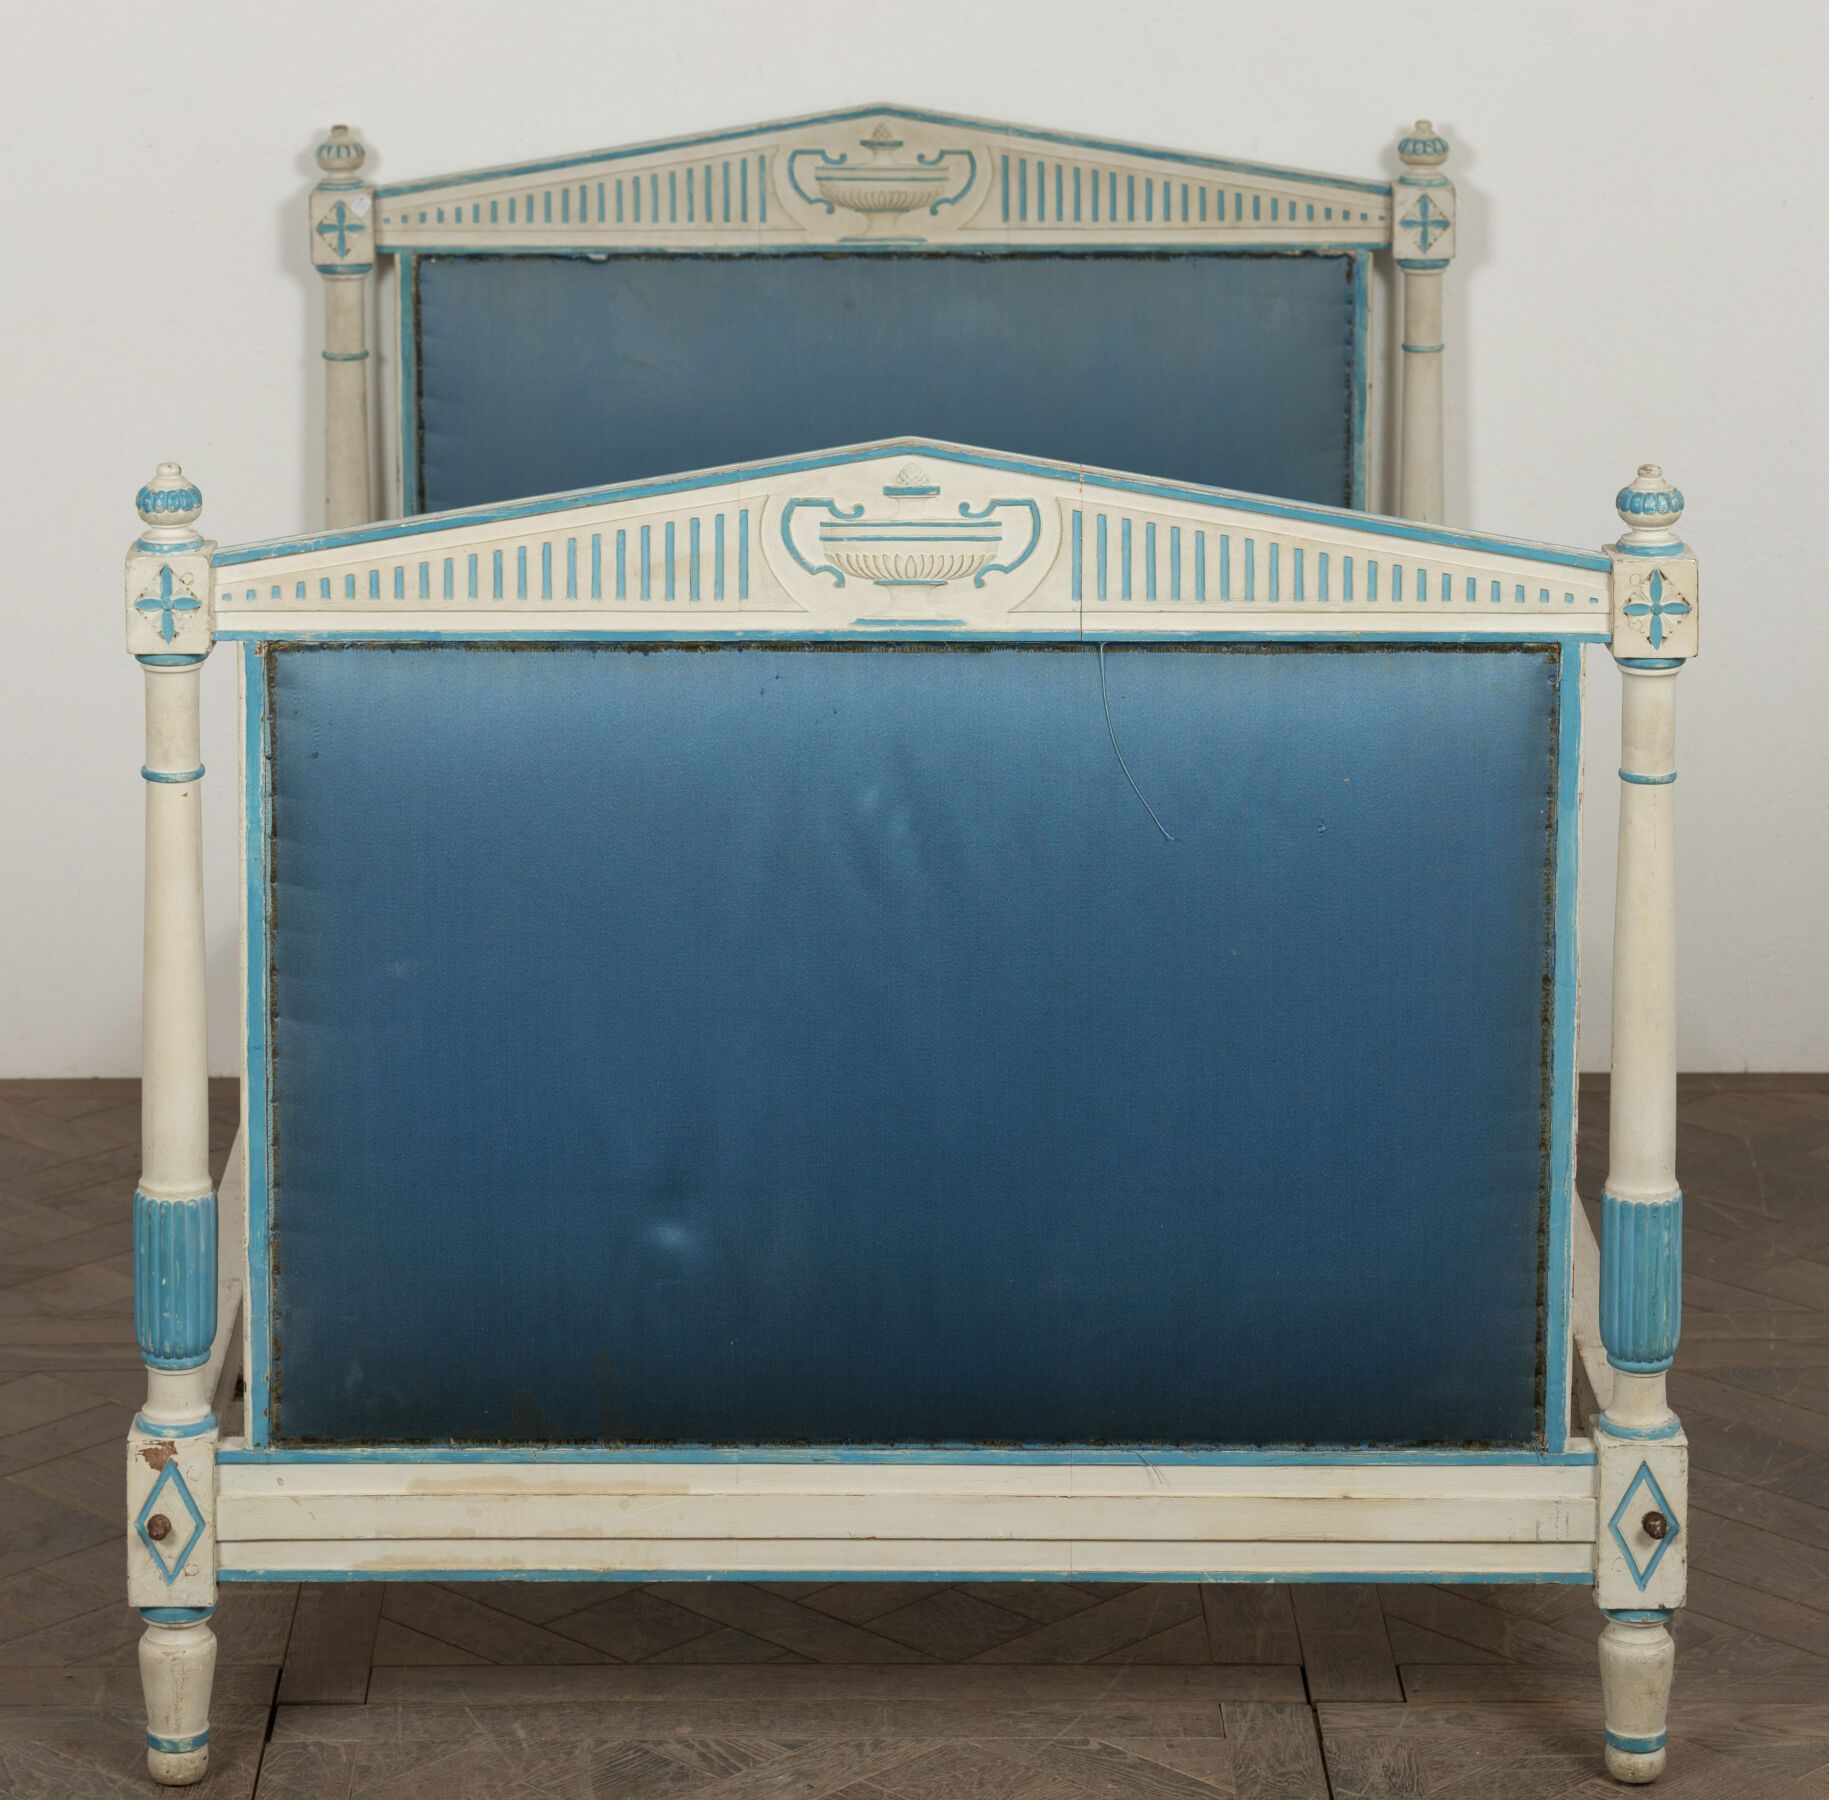 Null Bed in molded and carved wood, painted white and rechampi blue, with detach&hellip;